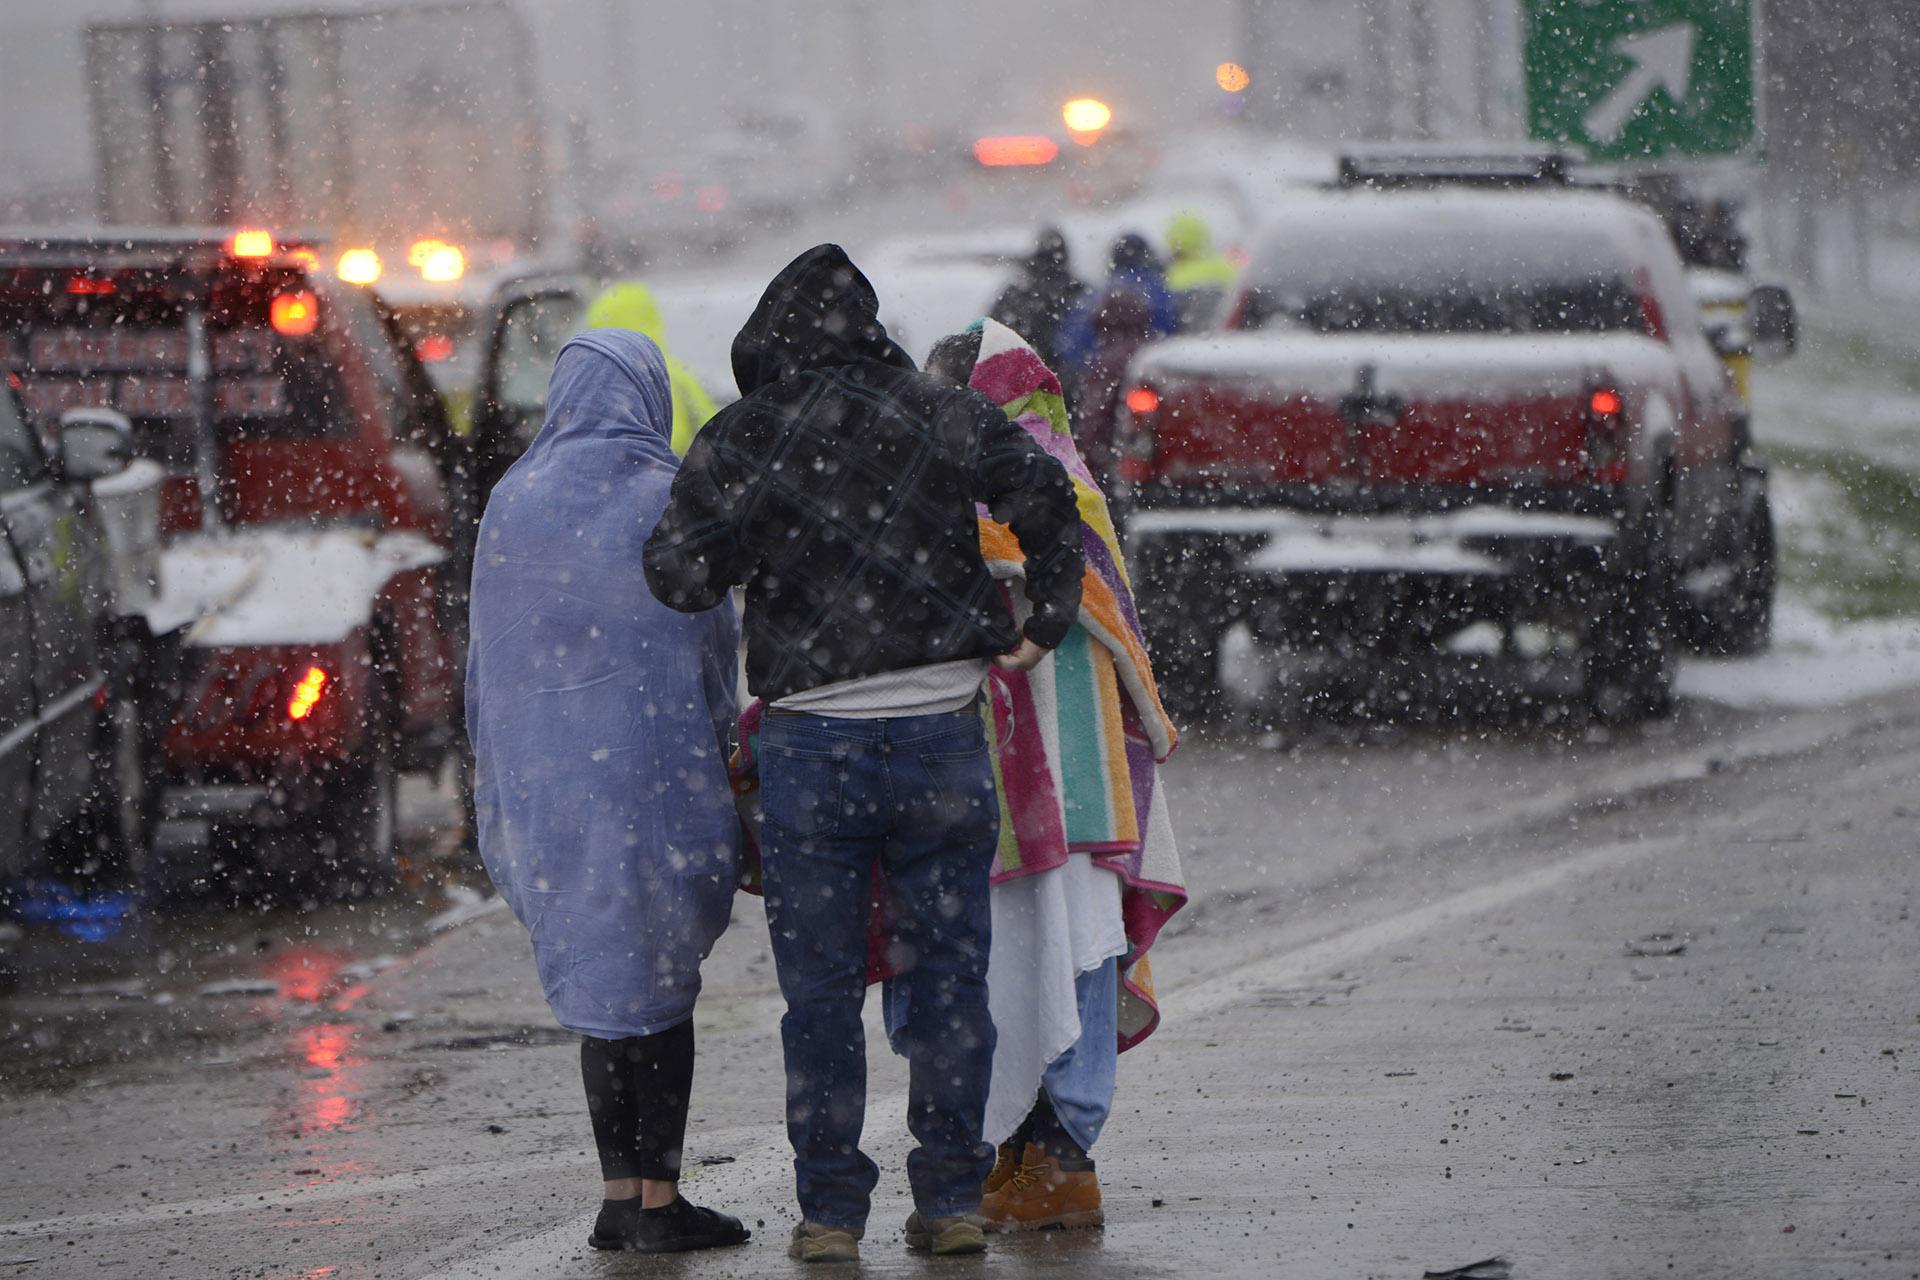 Motorists huddle together after a 54 car pile-up early morning on the Kennedy Expressway Wednesday, April 15, 2020, in Chicago. (AP Photo / Paul Beaty)